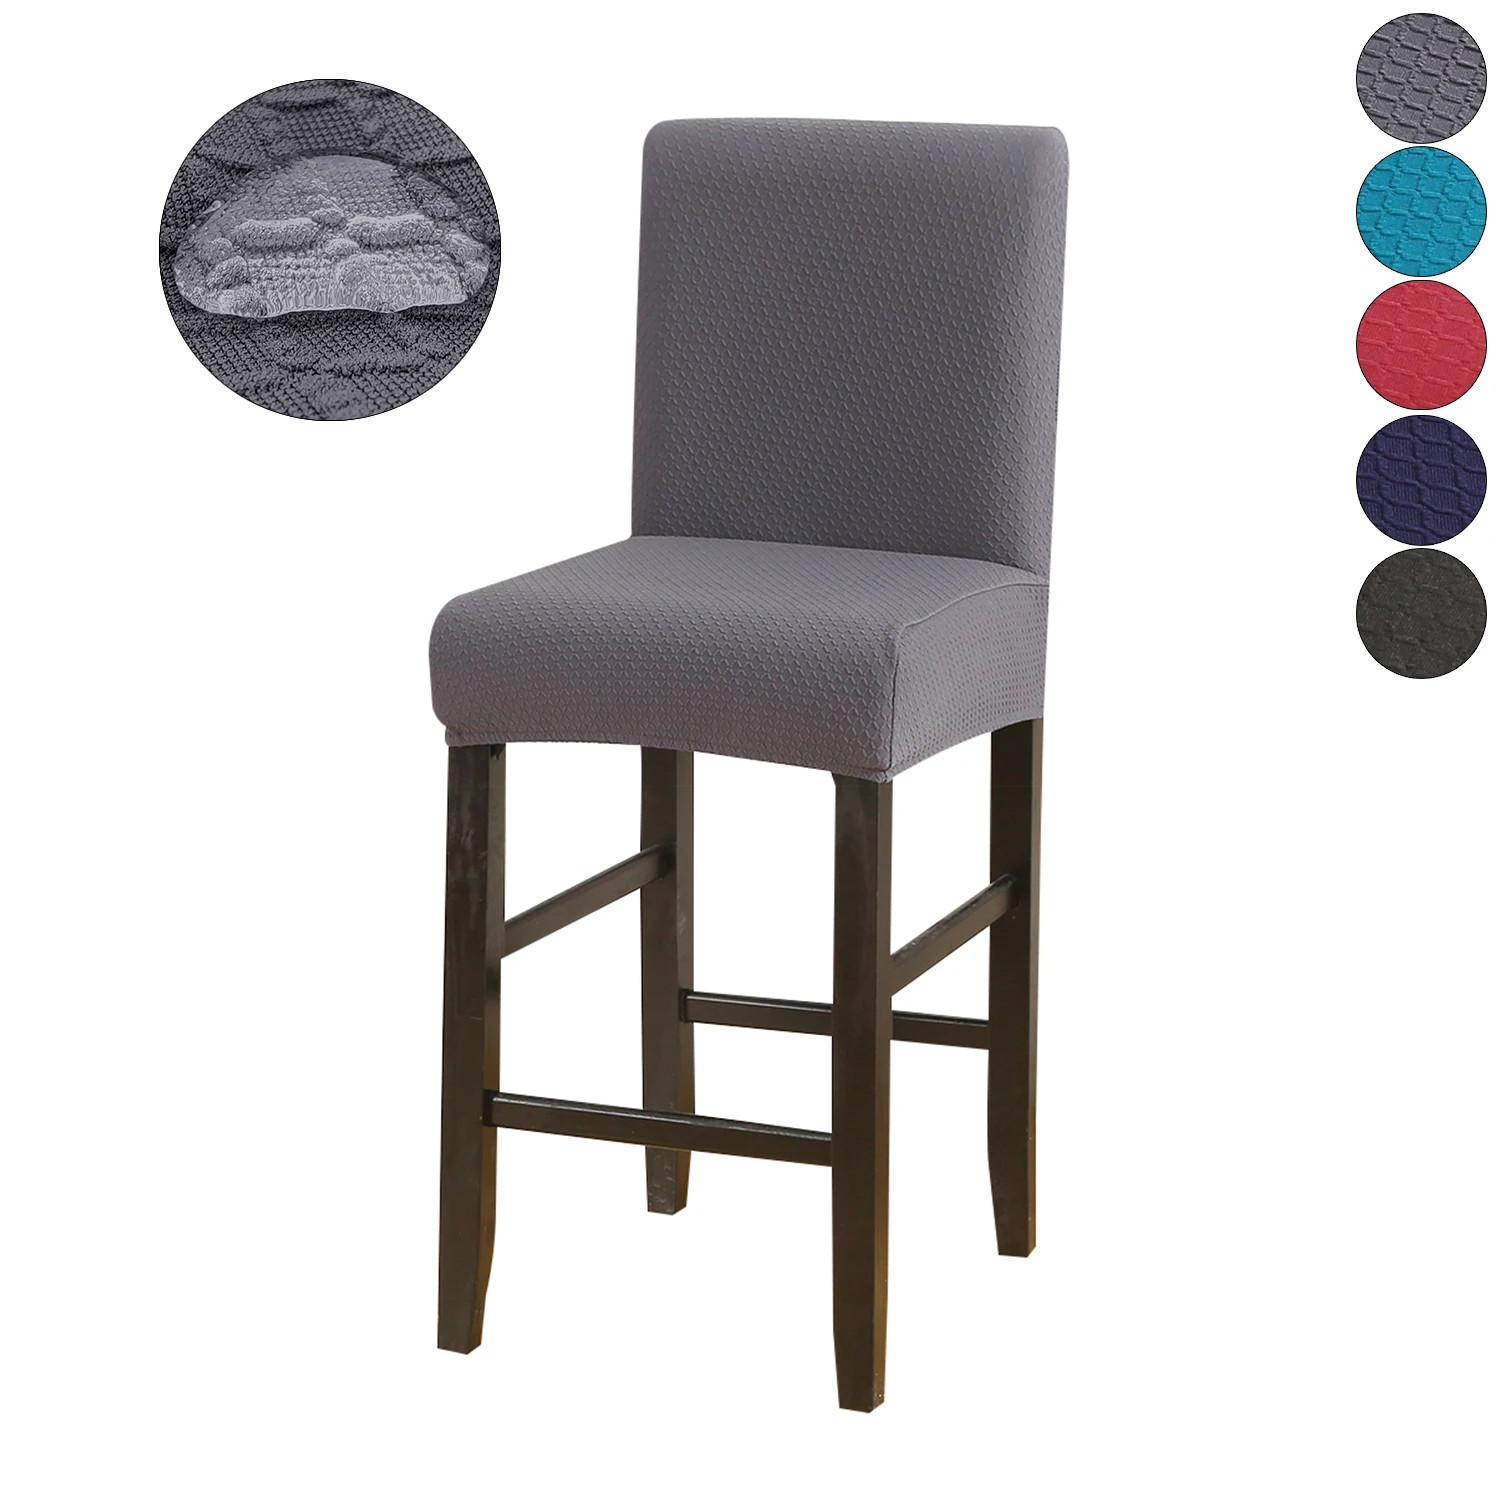 

Weave Jacquard Dining Chair Covers Waterproof Short Back Seat Slipcover Spandex Stretch Bar Stool Cover Home Counter Decor D30